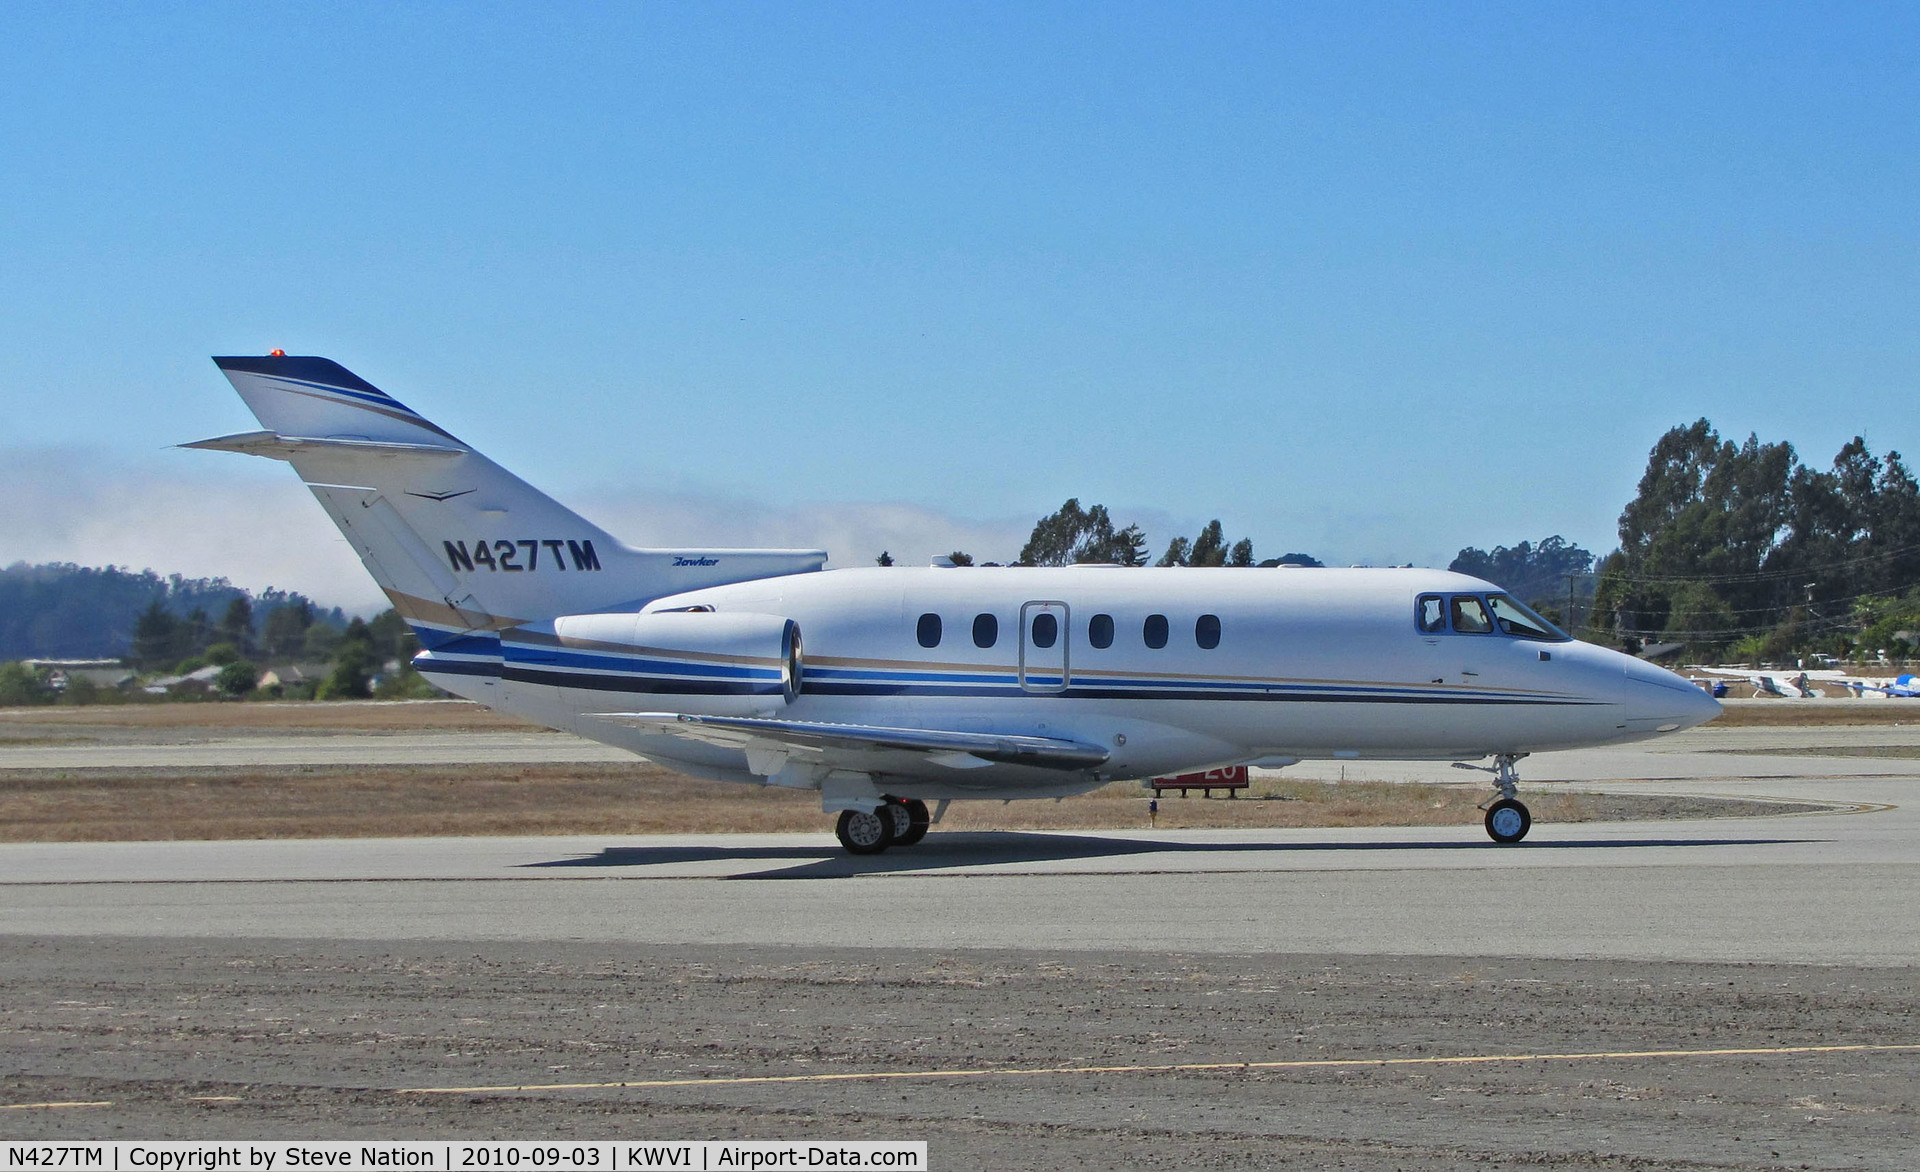 N427TM, 2005 Raytheon Hawker 800XP C/N 258720, Aircraft Holdings Raytheon Hawker 800XP taxiing at WVI during 2010 Watsonville Fly-In